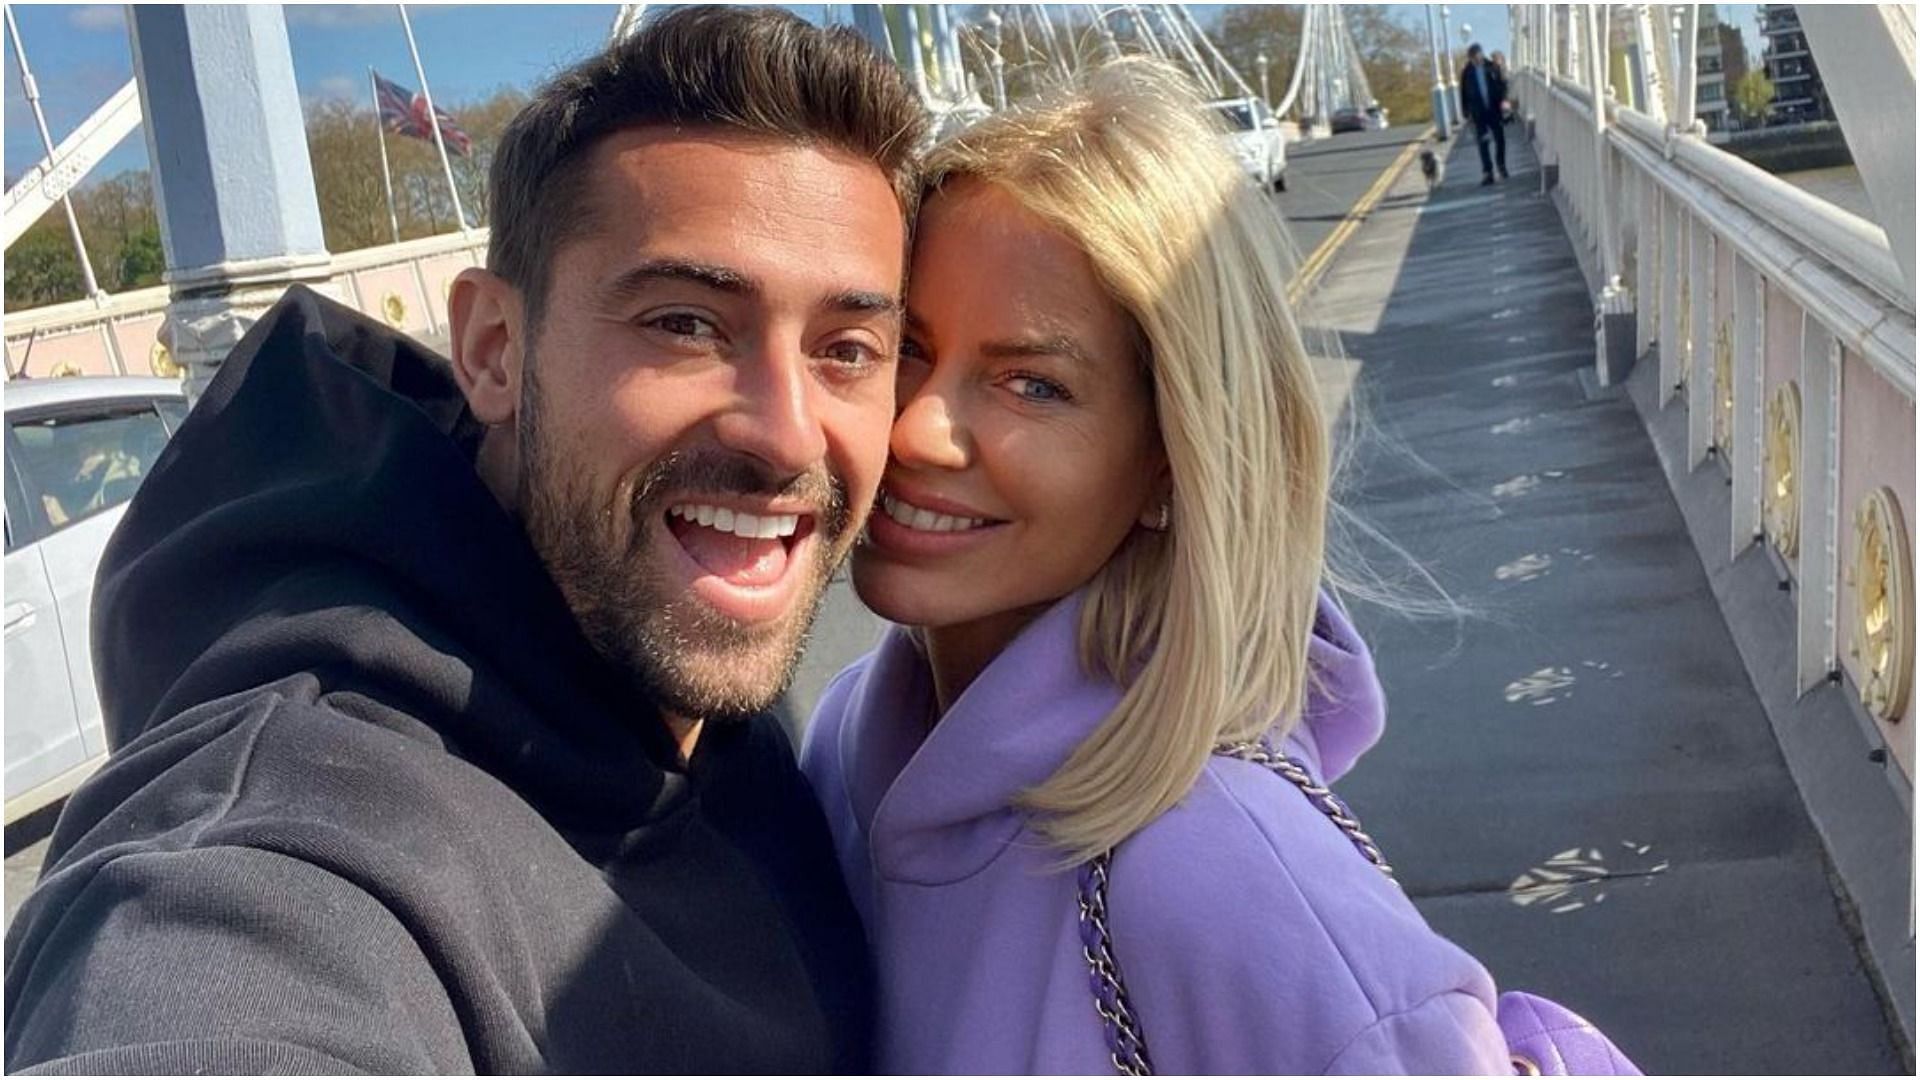 Caroline Stanbury and Sergio Carrallo are now married to each other (Image via carolinestanbury/Instagram)